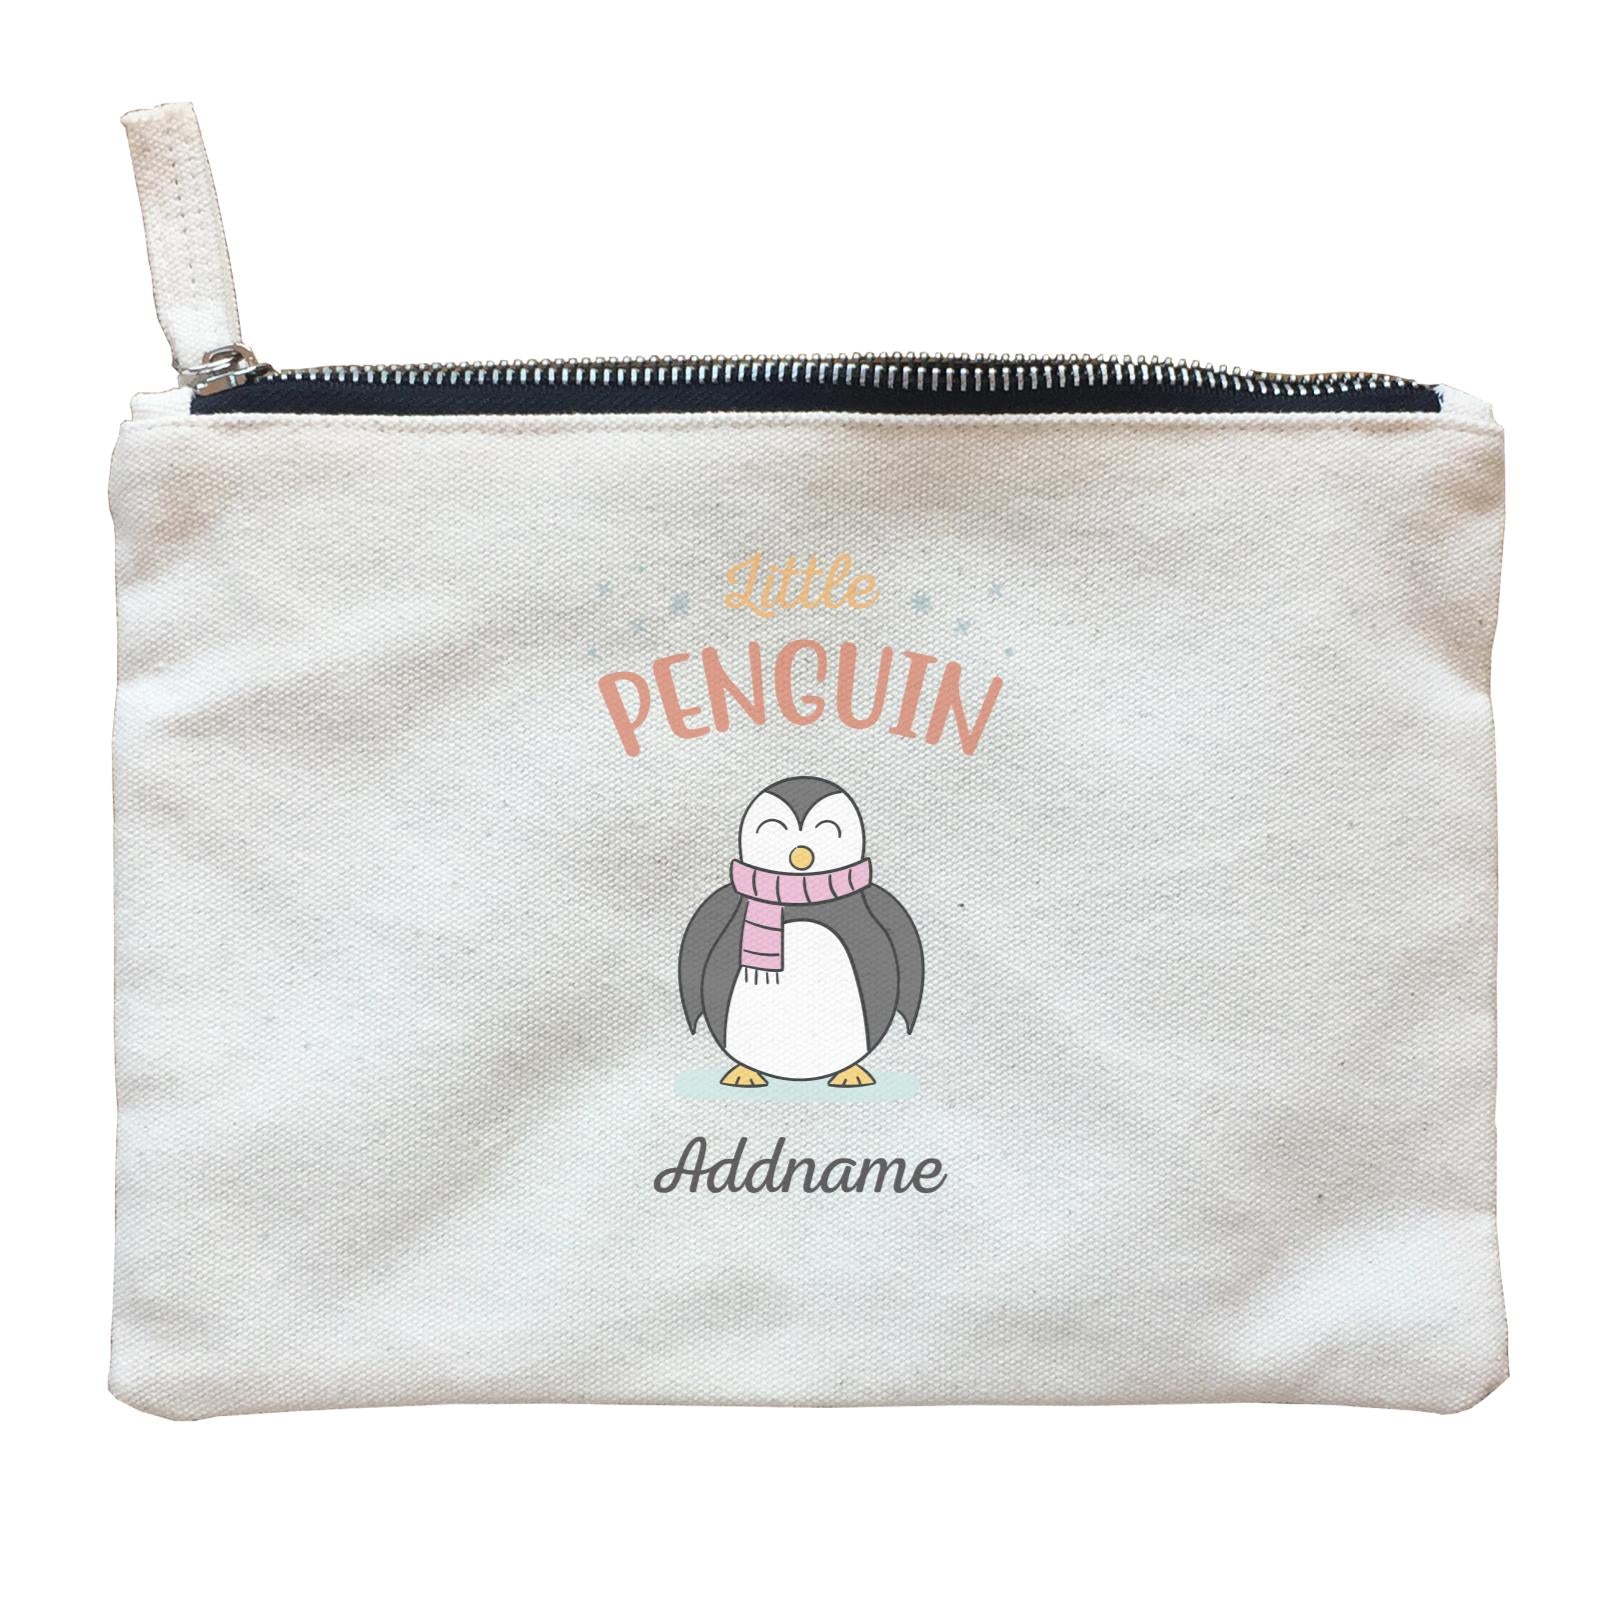 Penguin Family Little Penguin With Scarf Addname Zipper Pouch